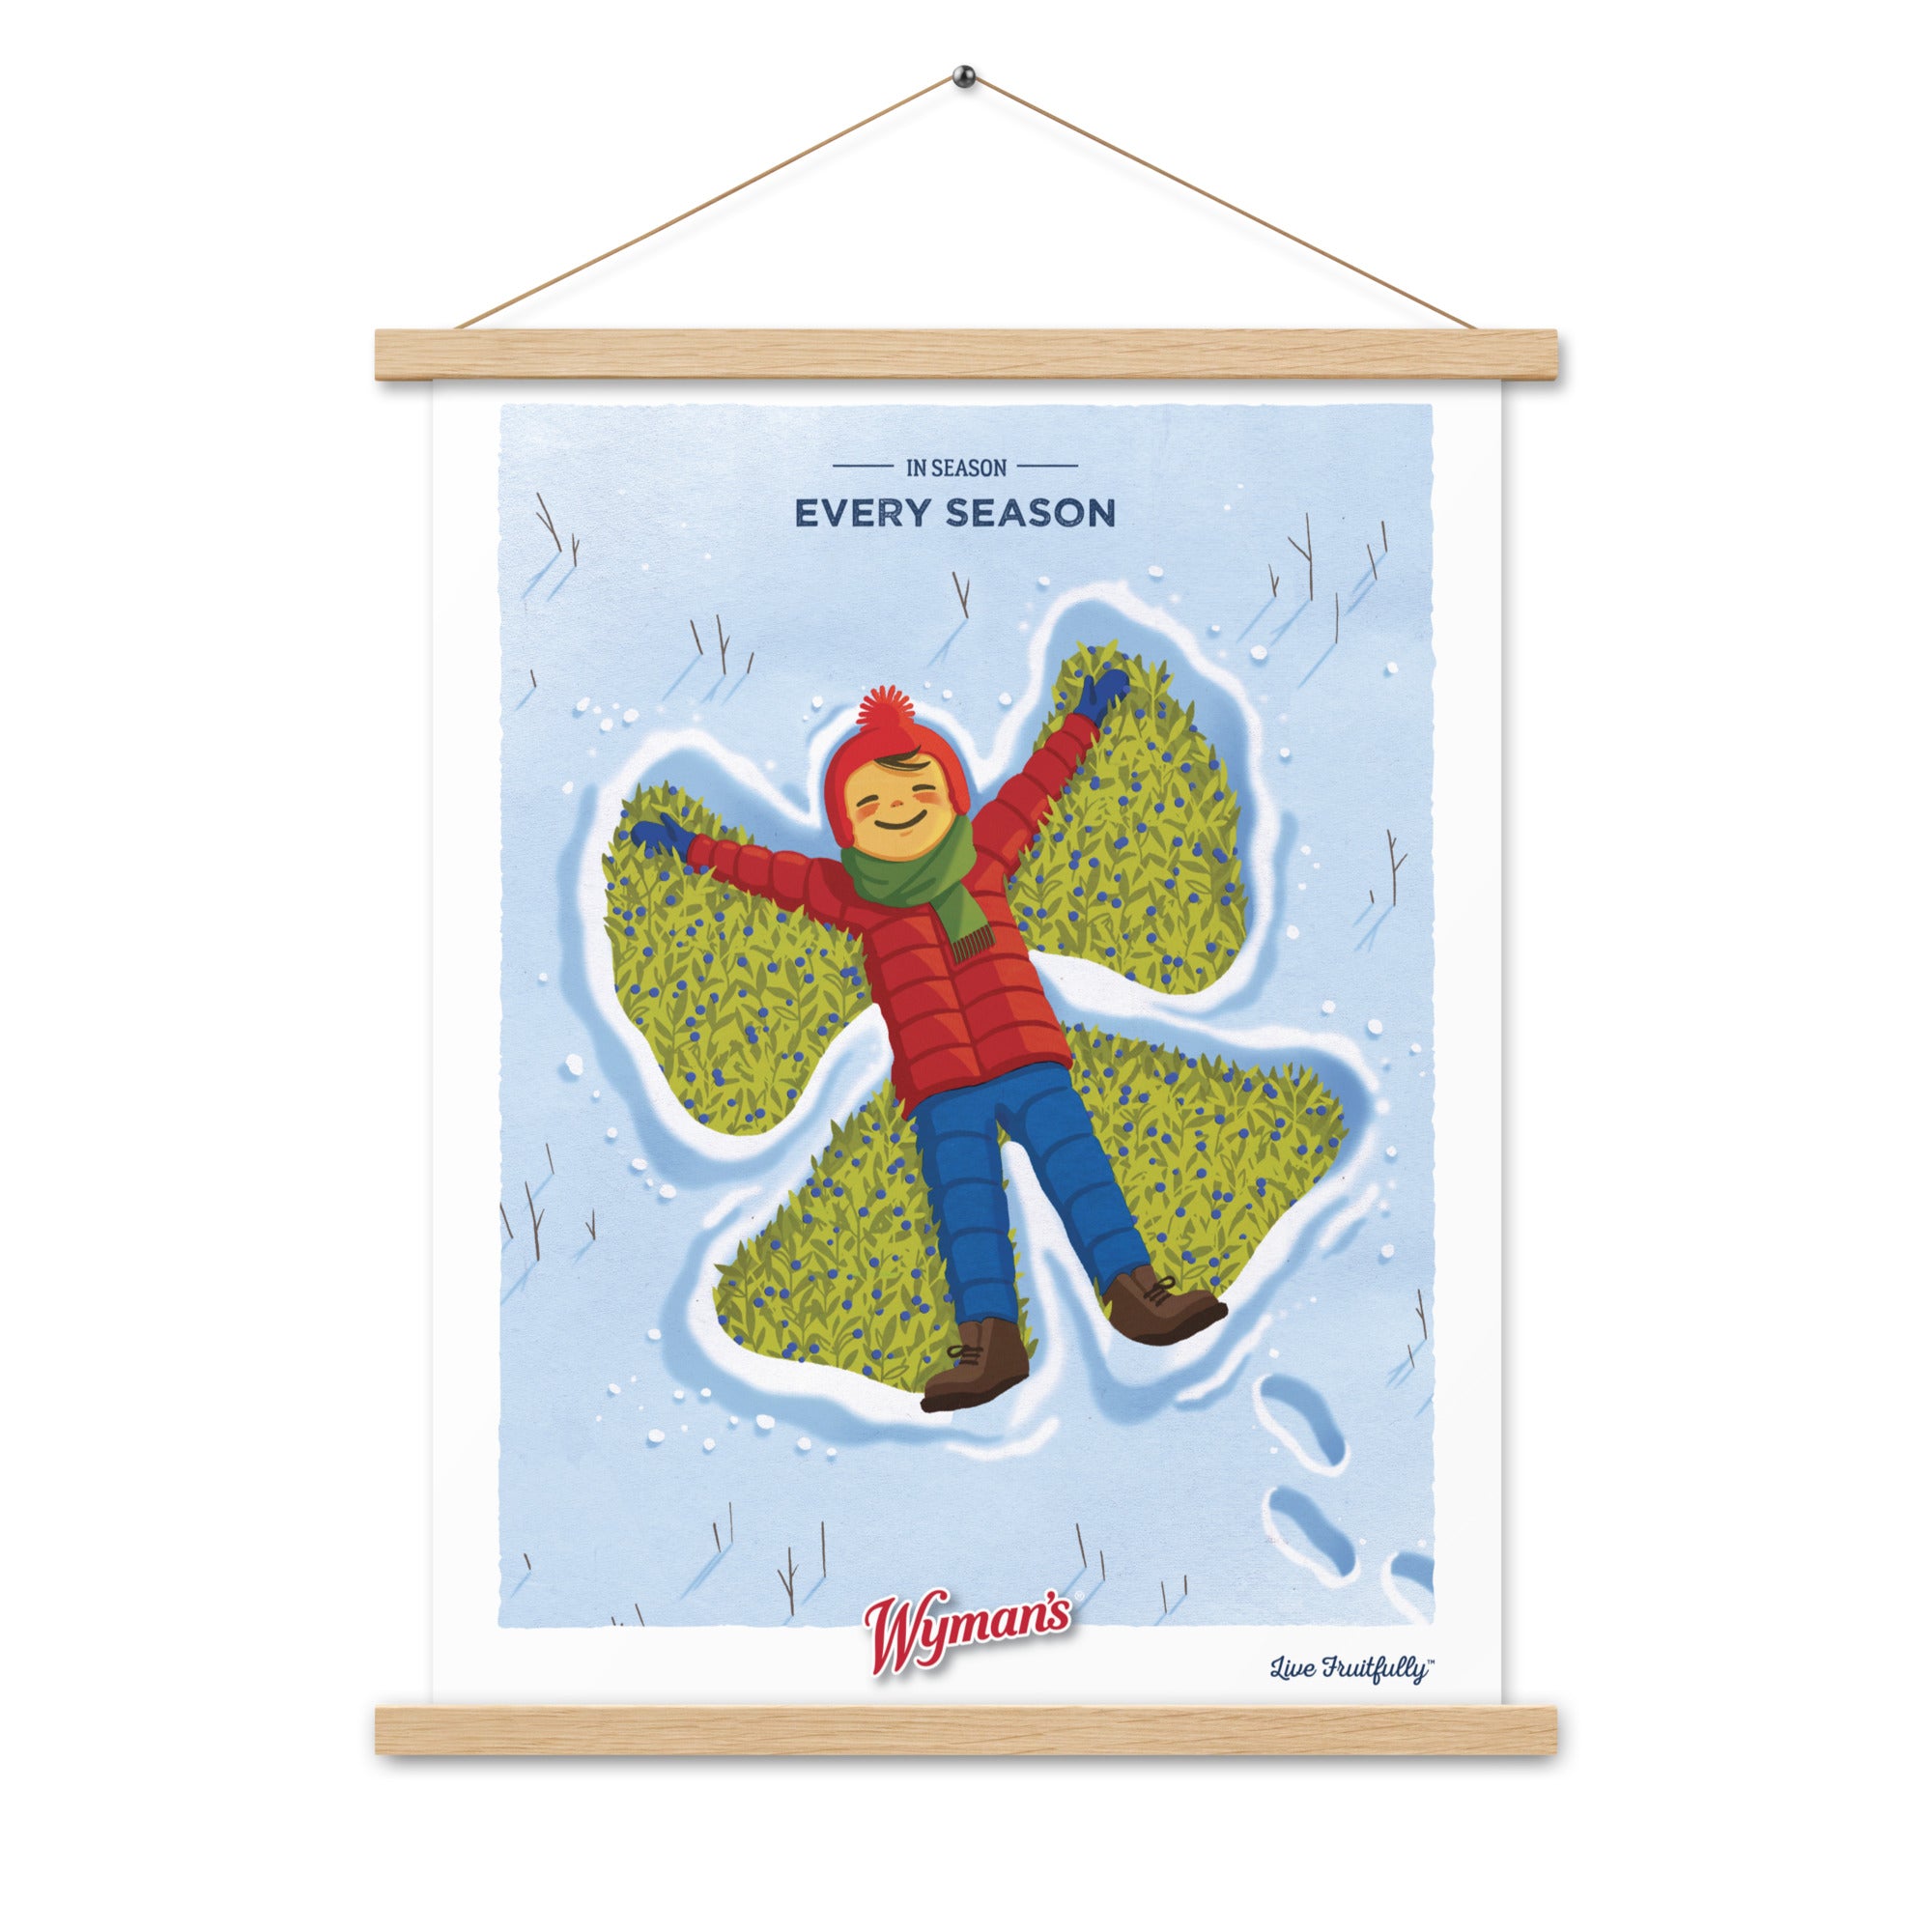 A custom-designed In Season, Every Season Poster with a picture of a girl holding a snowflake, enhanced by elegant printing finishes from Shop Wyman's.